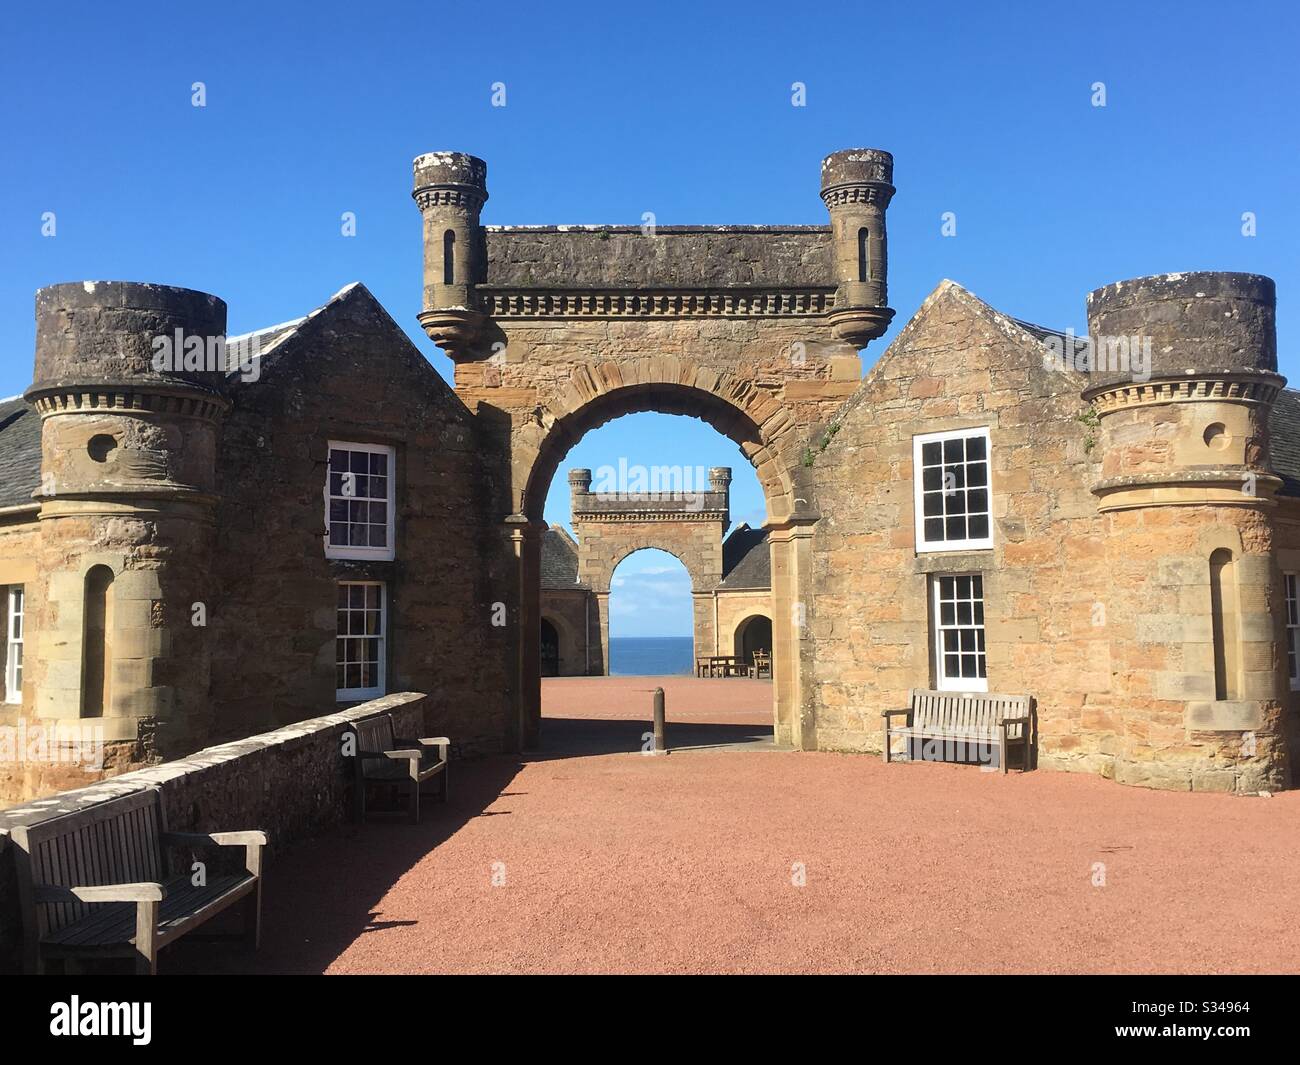 The Firth of Clyde through the courtyard archways of Culzean Castle,National Trust for Scotland, Ayrshire, Scotland Stock Photo